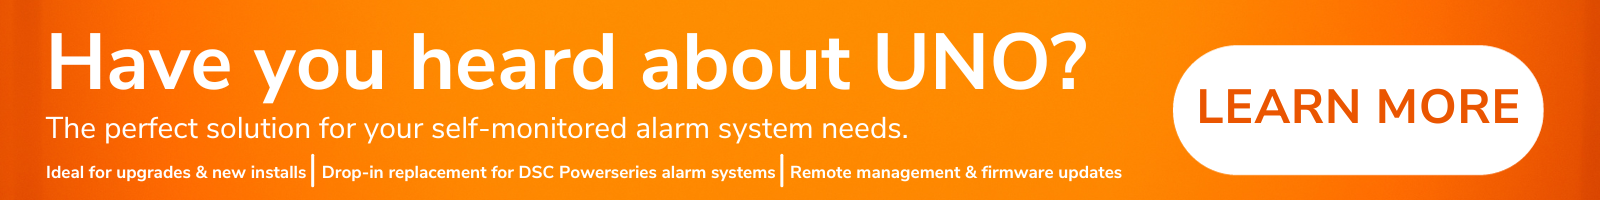 Have you heard of Uno? The perfect self-monitored solution for your alarm system needs